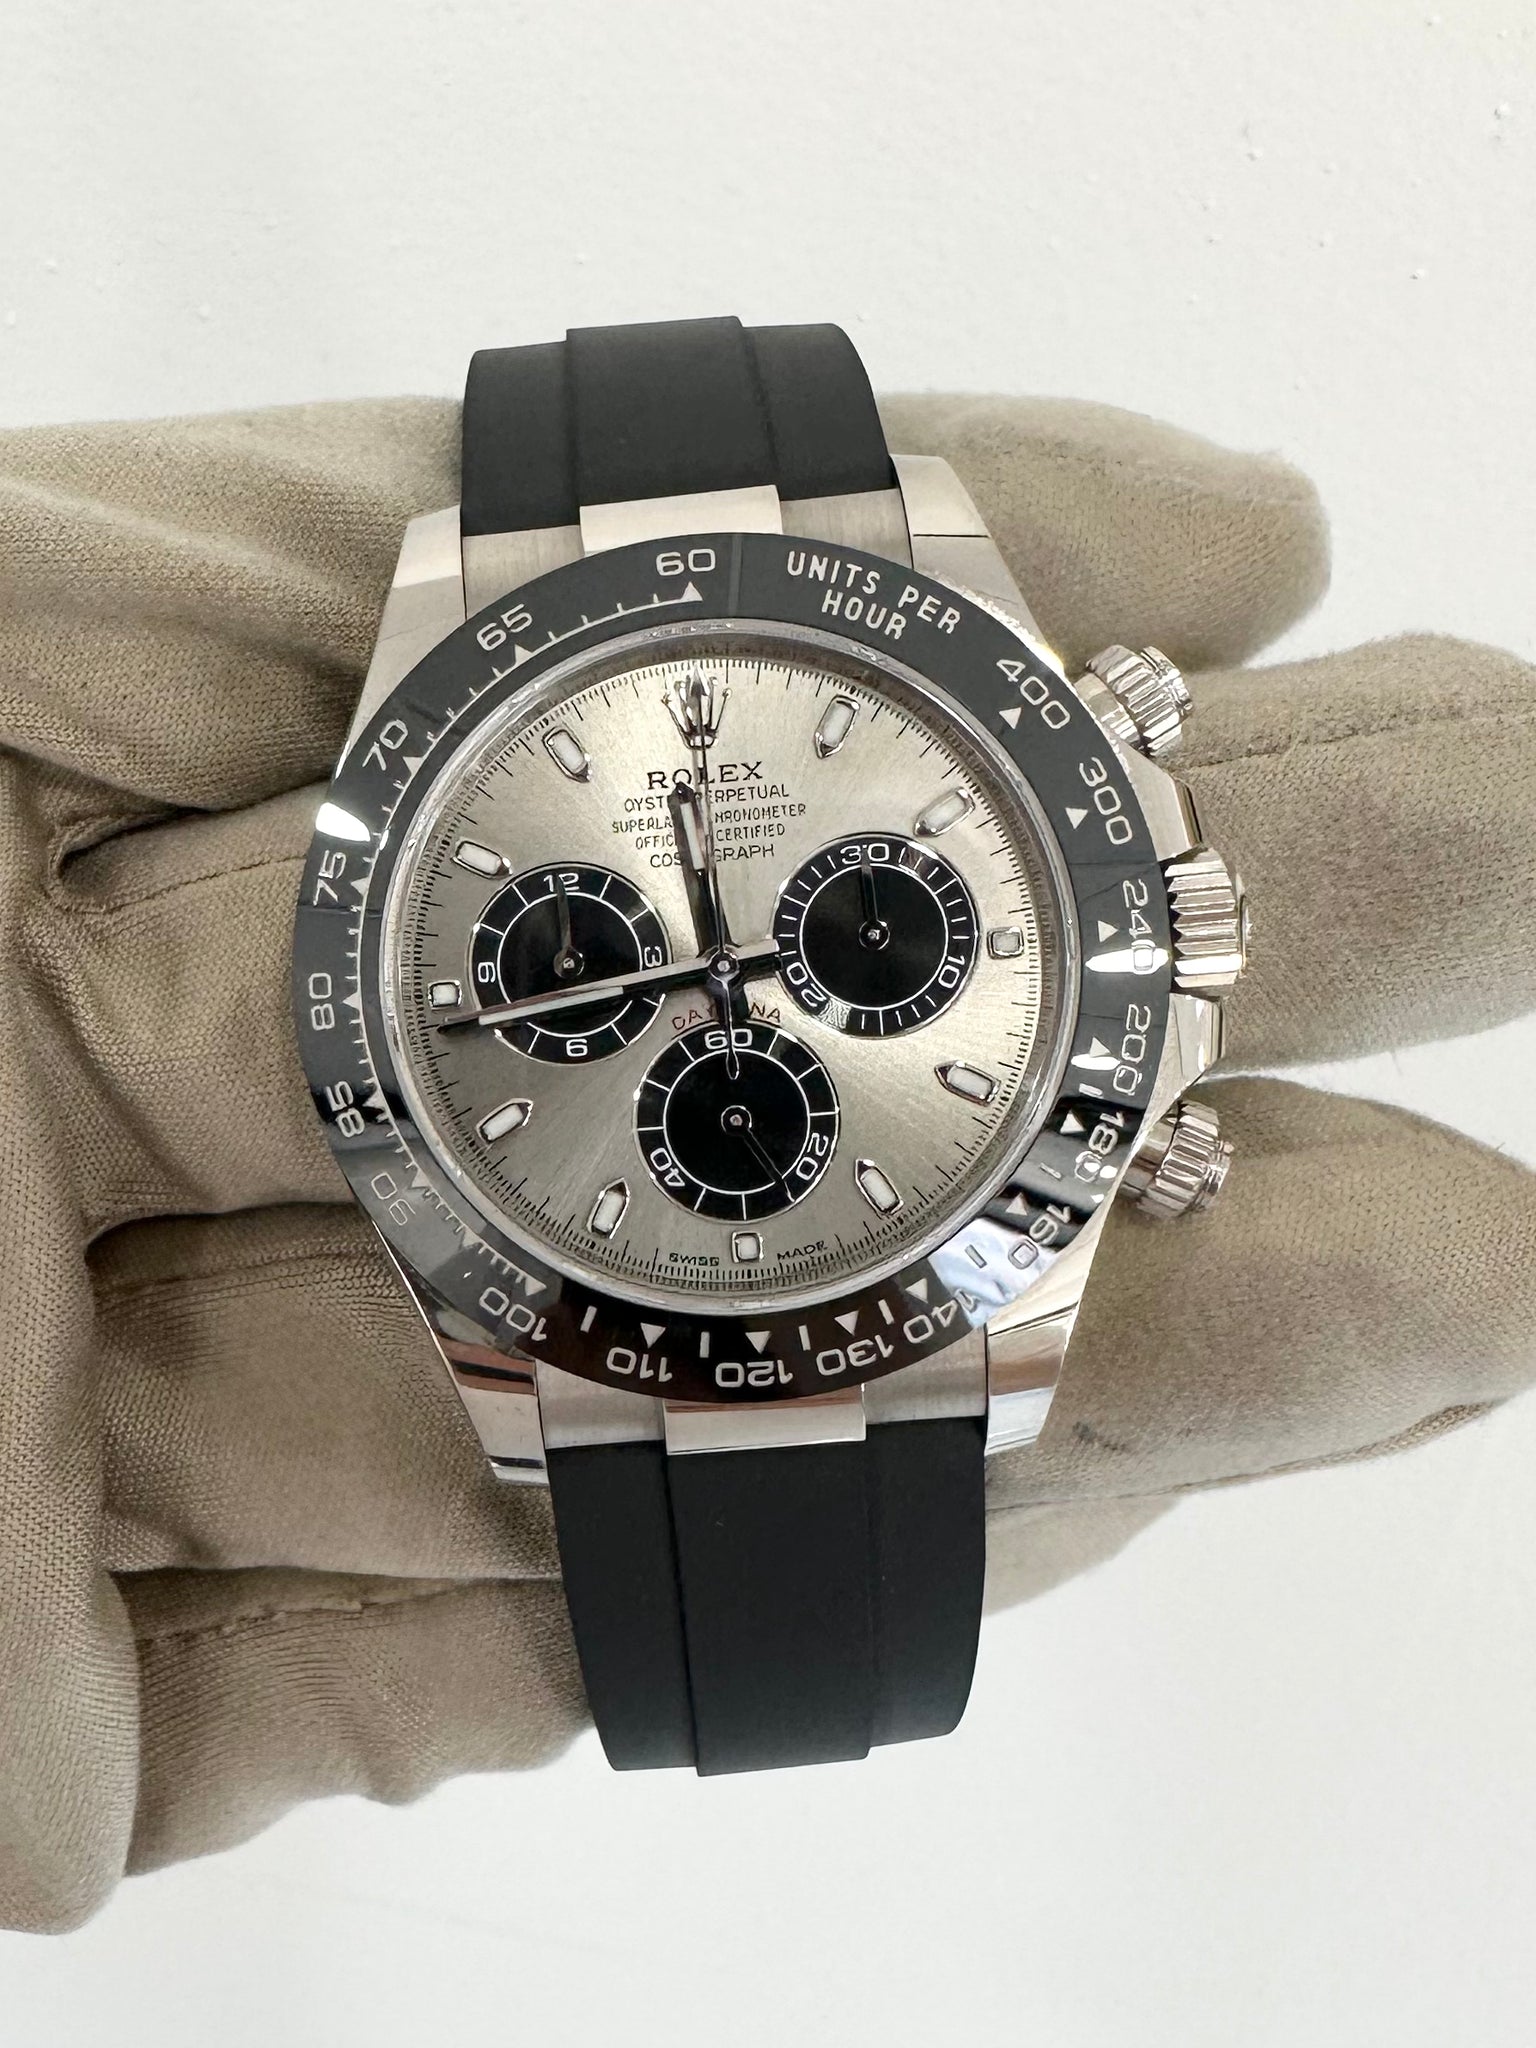 Rolex Daytona White Gold with Grey Dial on Oysterflex (Pre-owned)